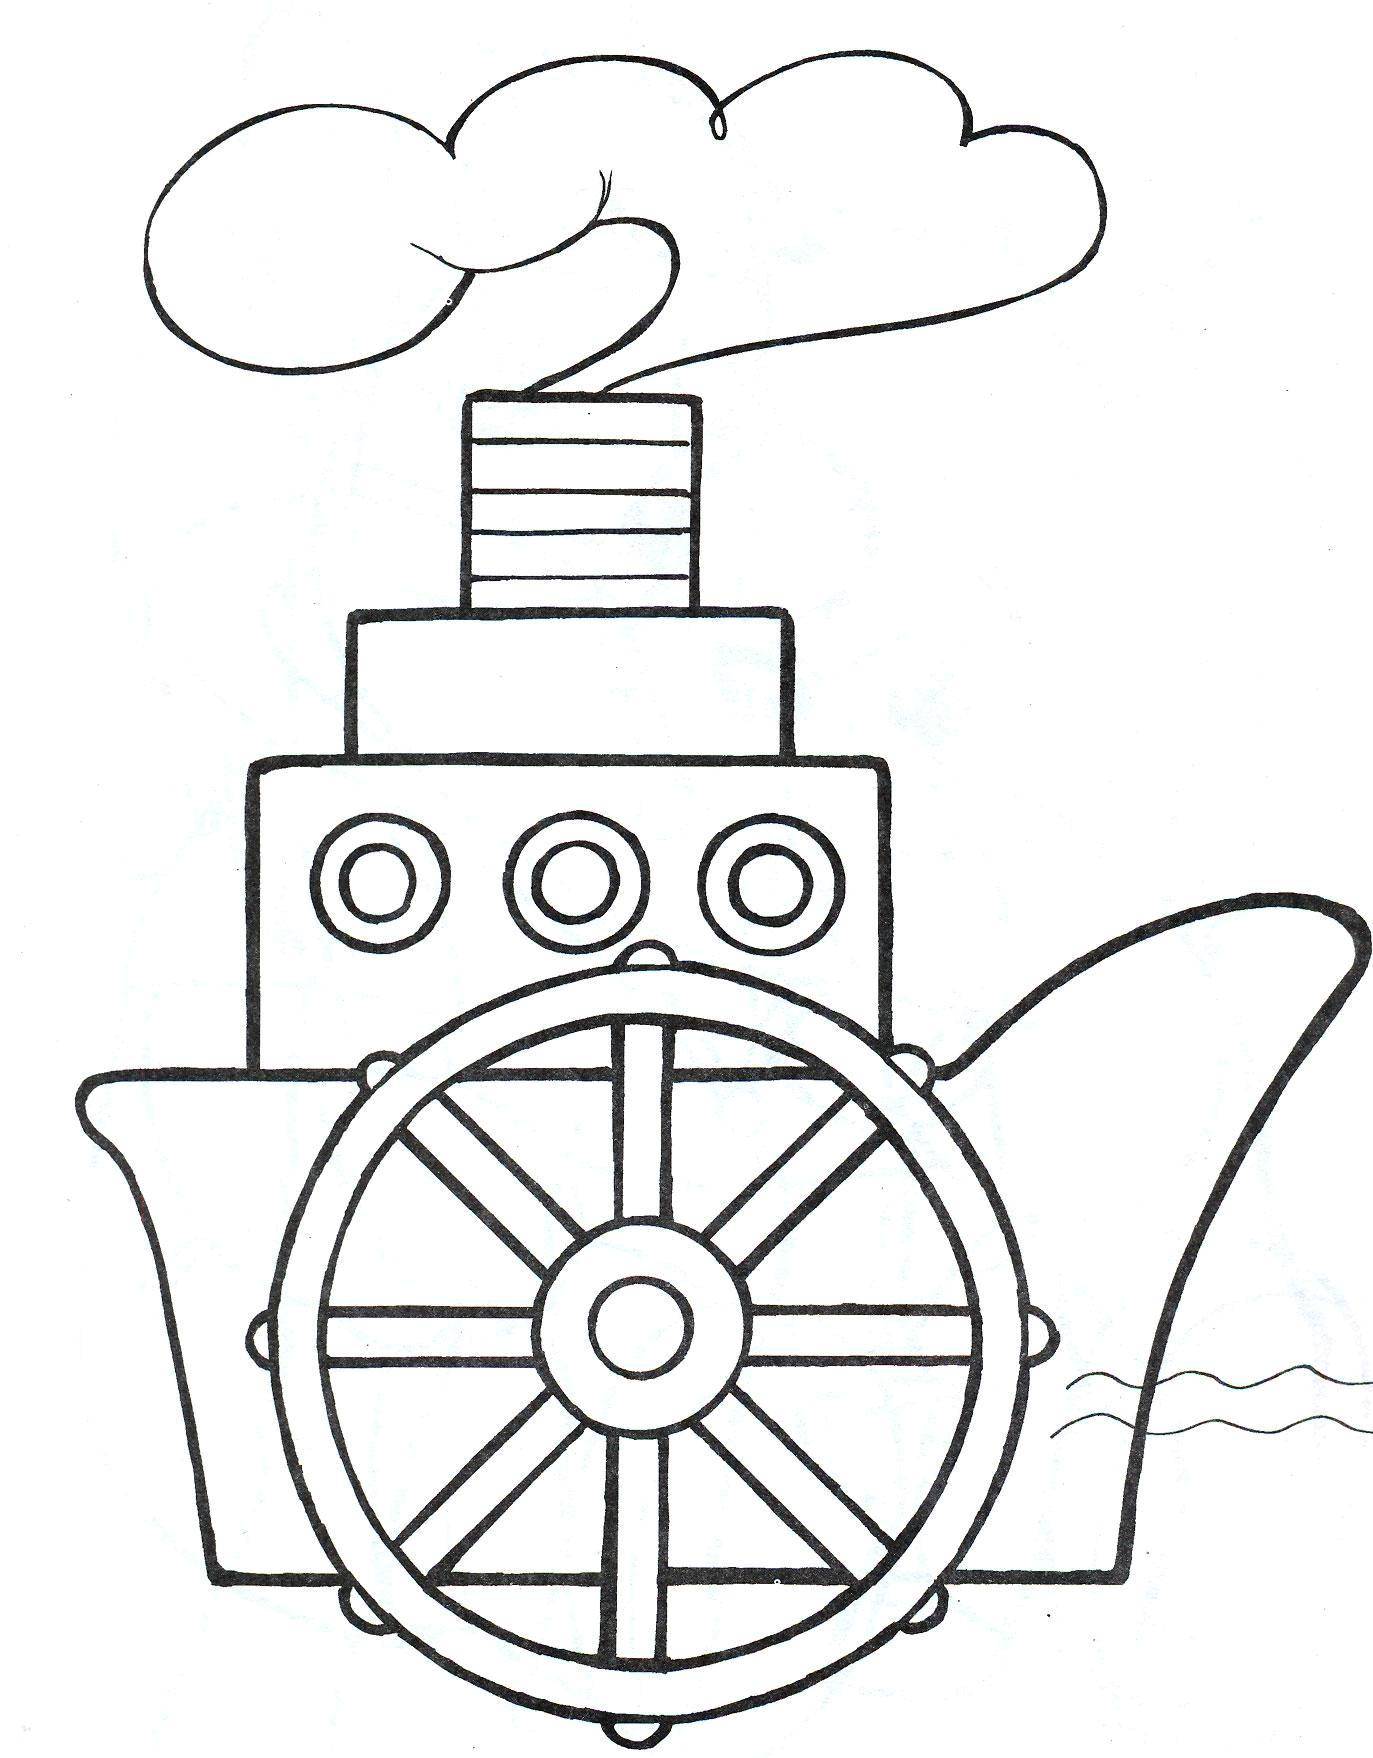 Coloring The helm of the ship. Category little ones. Tags:  Ship, steamboat.